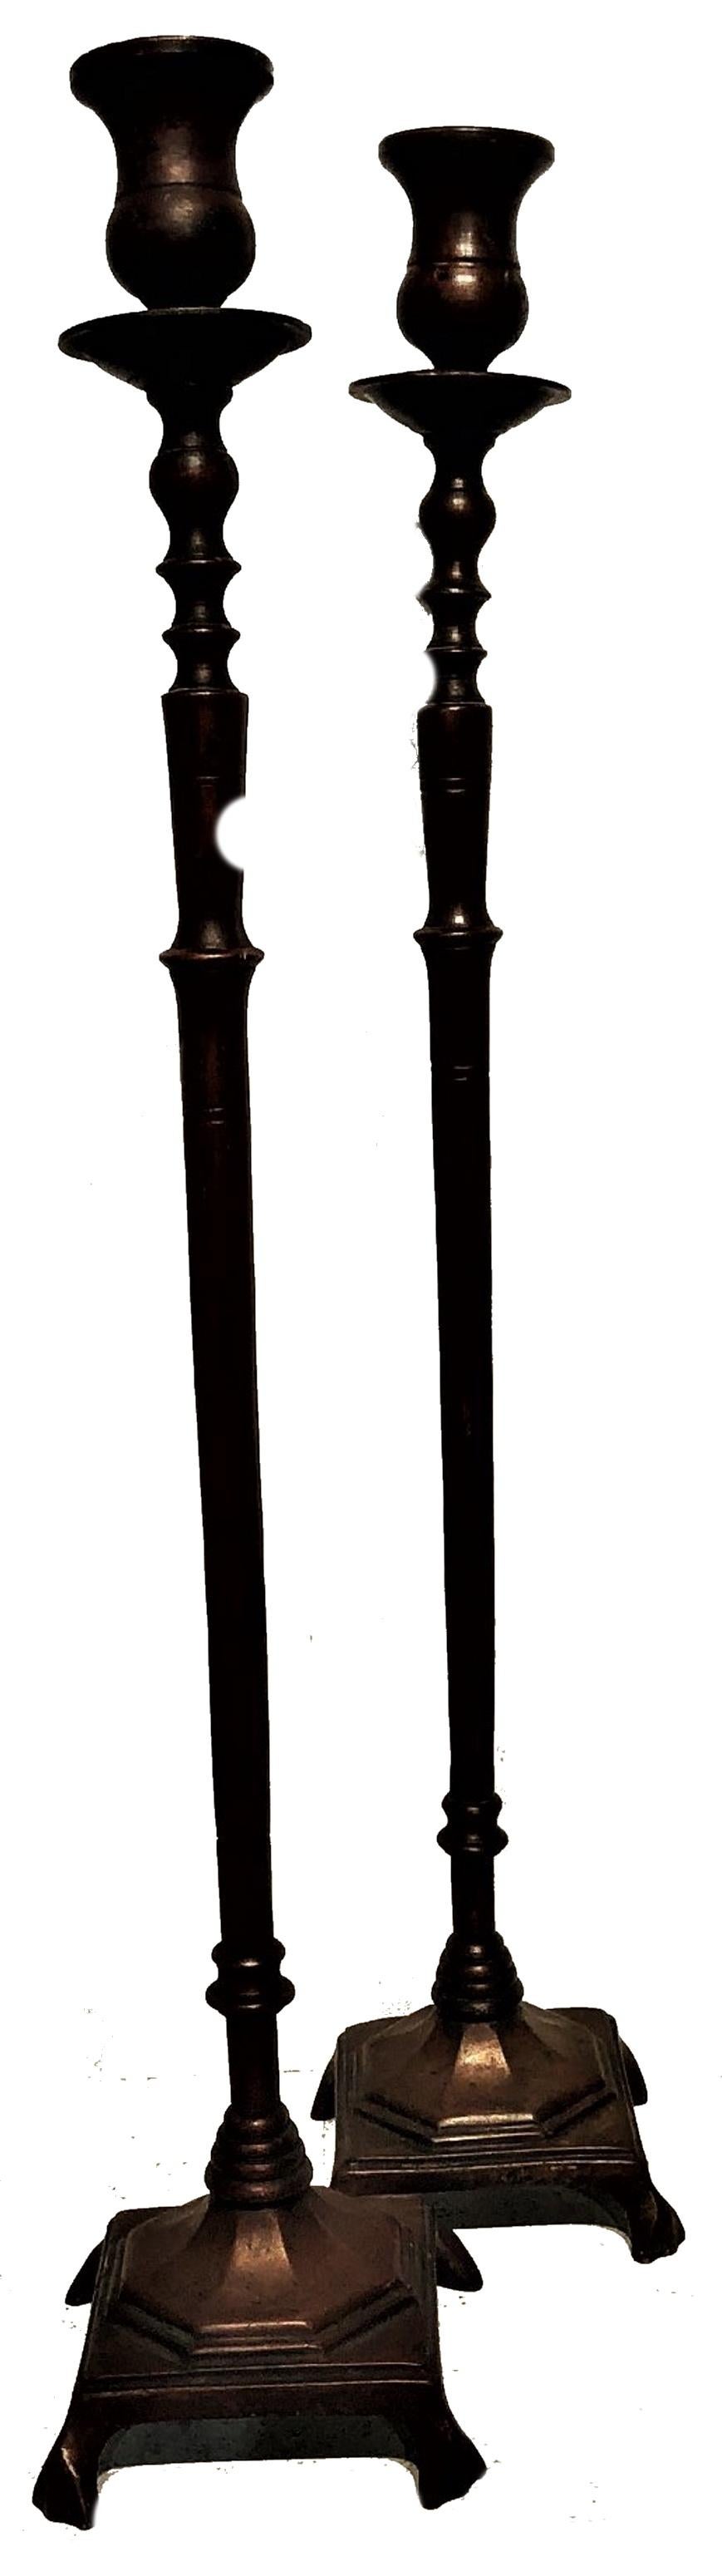 Aesthetic Movement Pair of Bronze Candlesticks in Manner of Tiffany, ca. 1880s For Sale 1